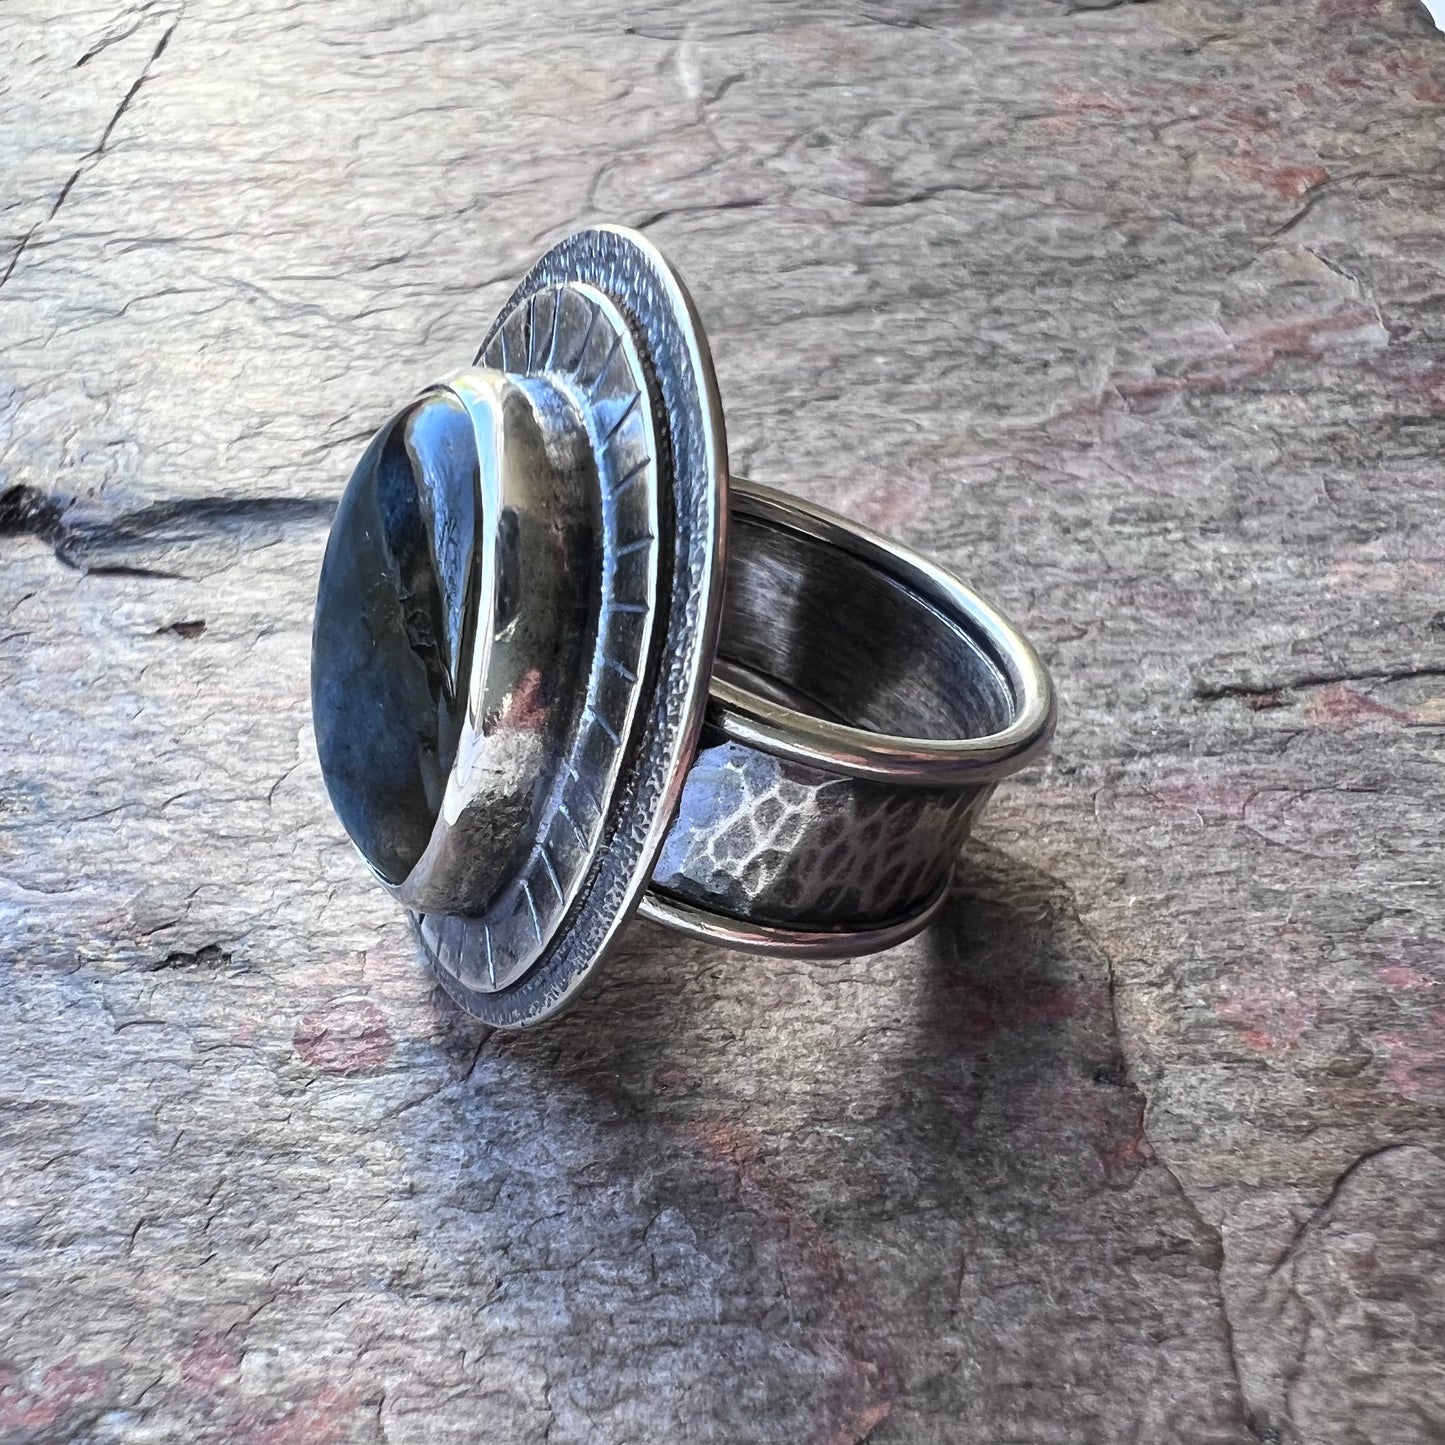 Labradorite Sterling Silver Ring - Handmade One-of-a-kind Labradorite Statement Ring on Hammered Silver Band - Size 10